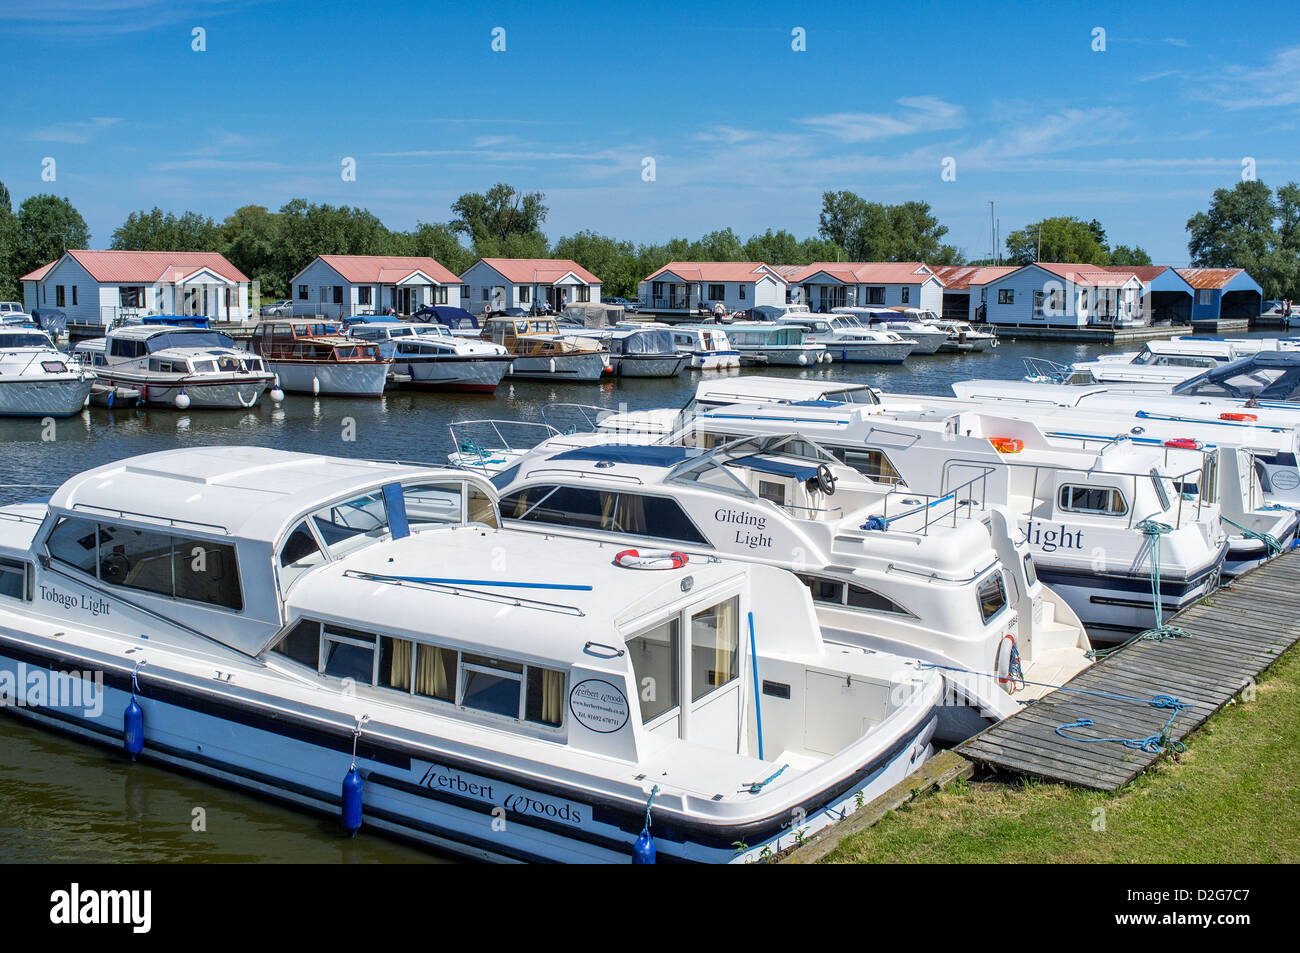 Broads Haven Boatyard With Hire Boats And Holiday Cottages At